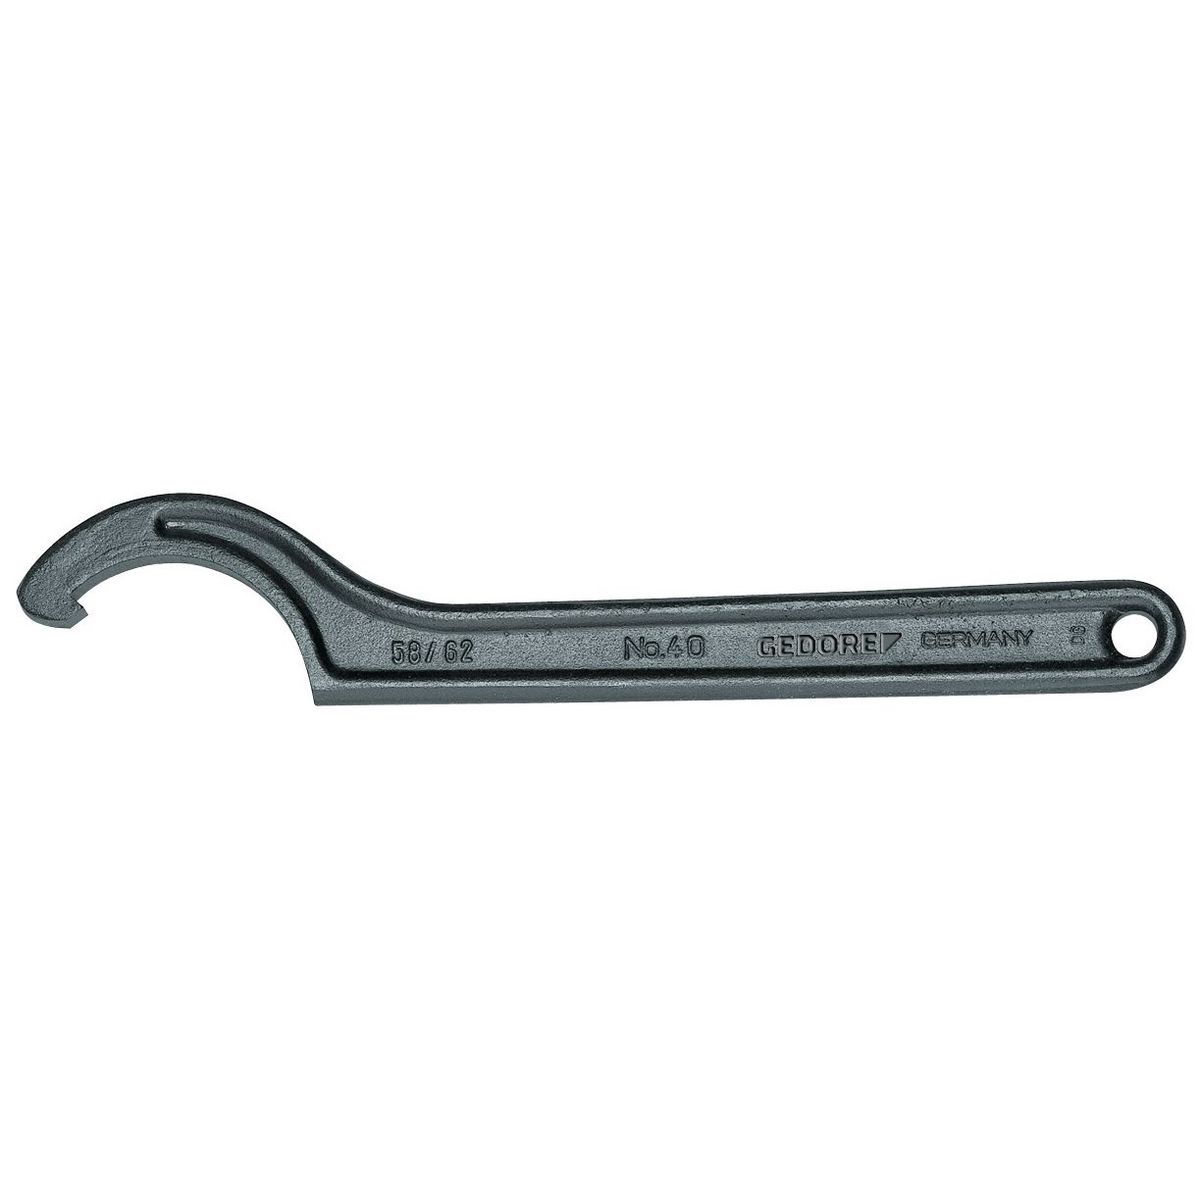 Hook wrench with lug, 45-50mm No.40 45-50 Gedore